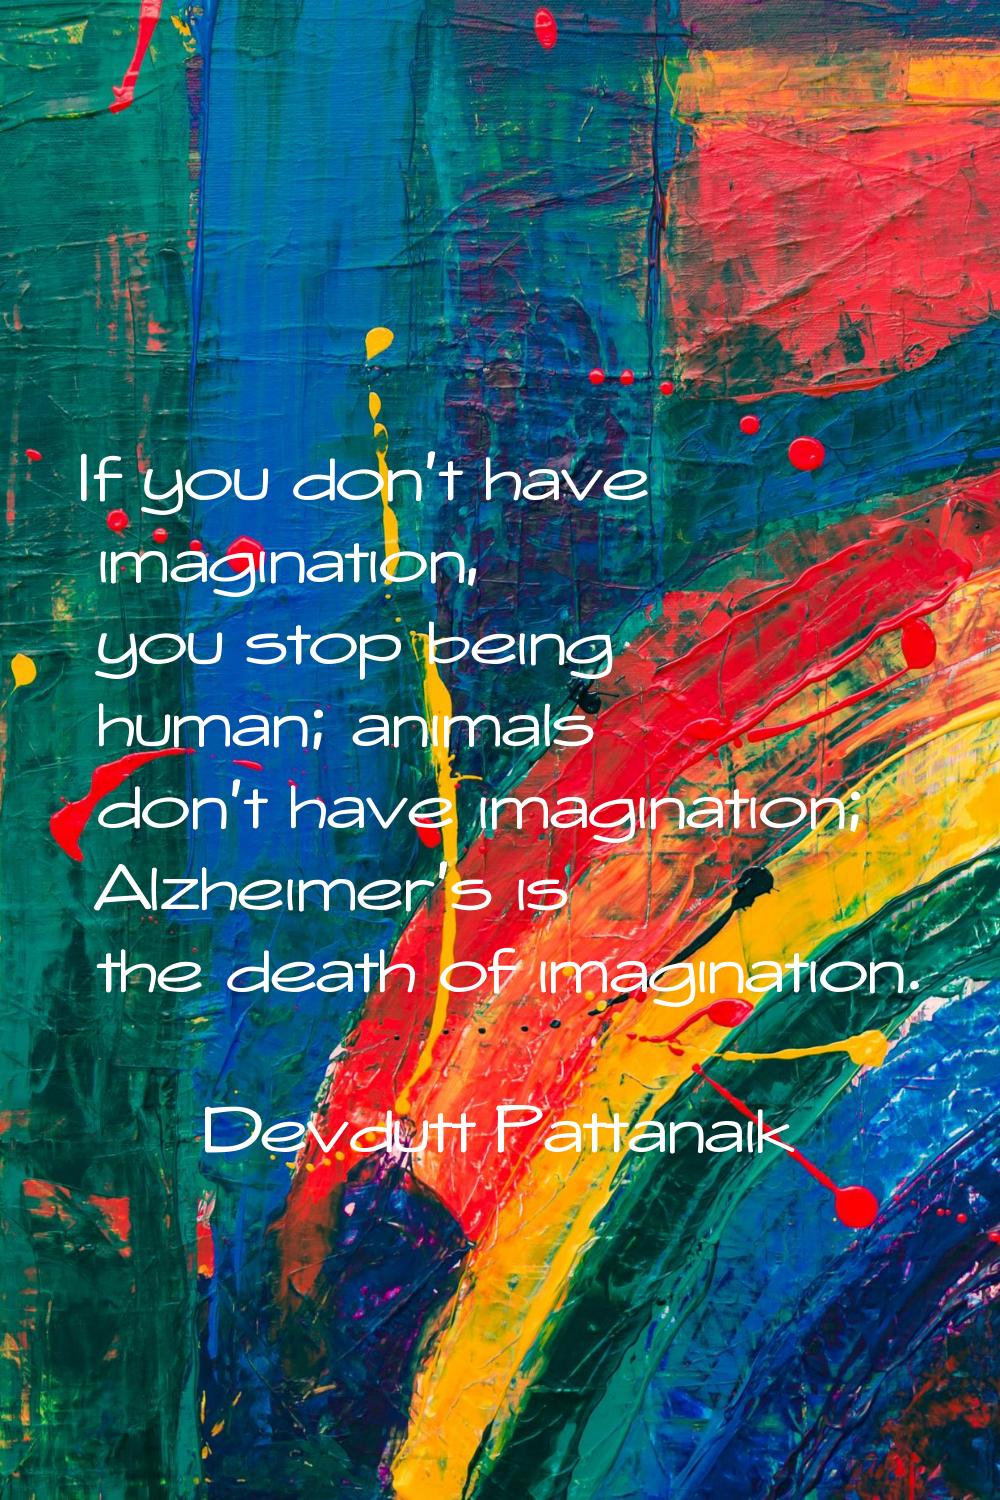 If you don't have imagination, you stop being human; animals don't have imagination; Alzheimer's is